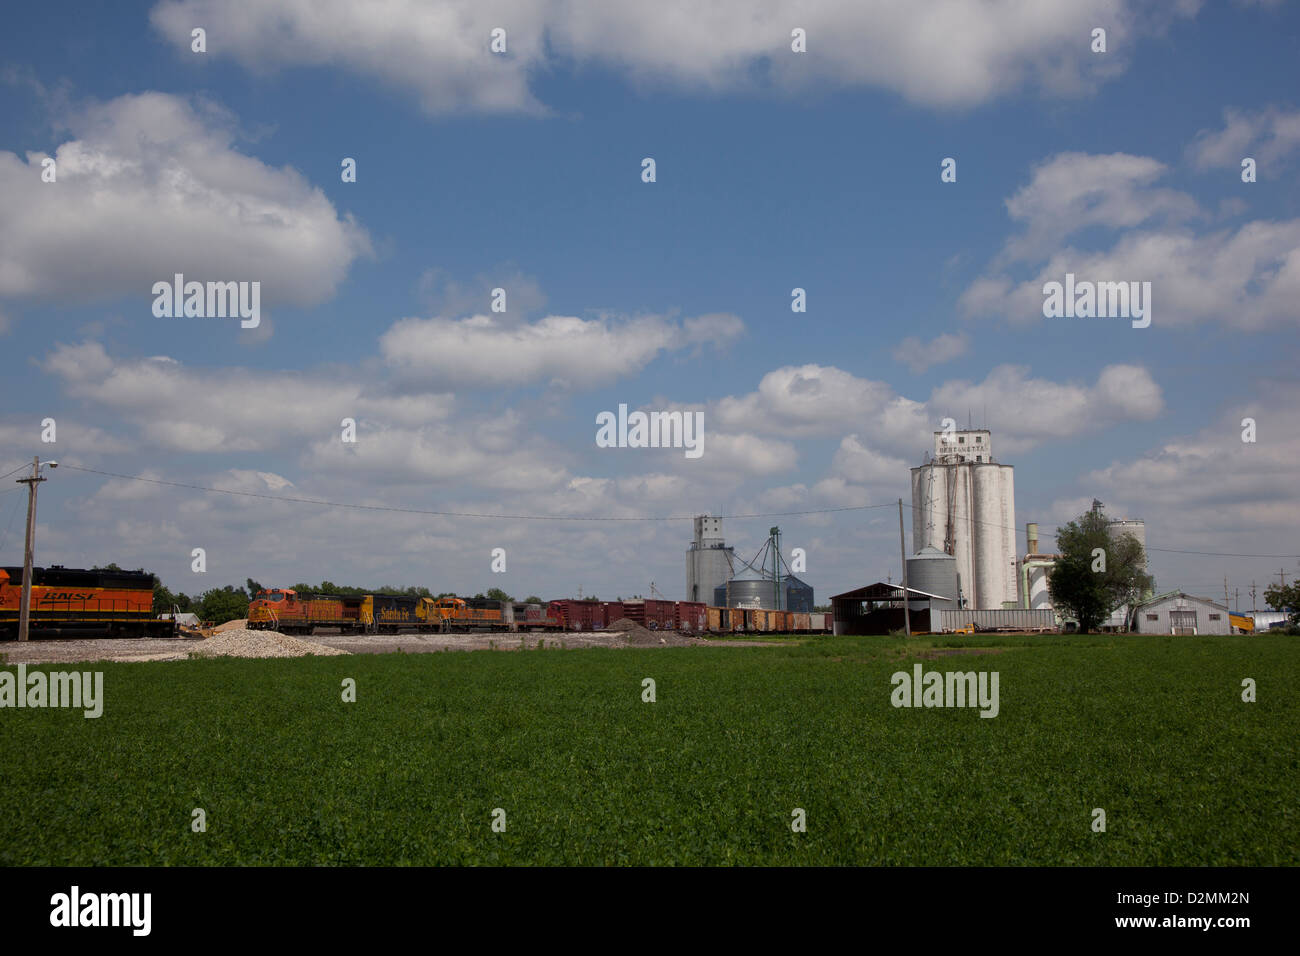 Train stopped at a rural grain mill Stock Photo